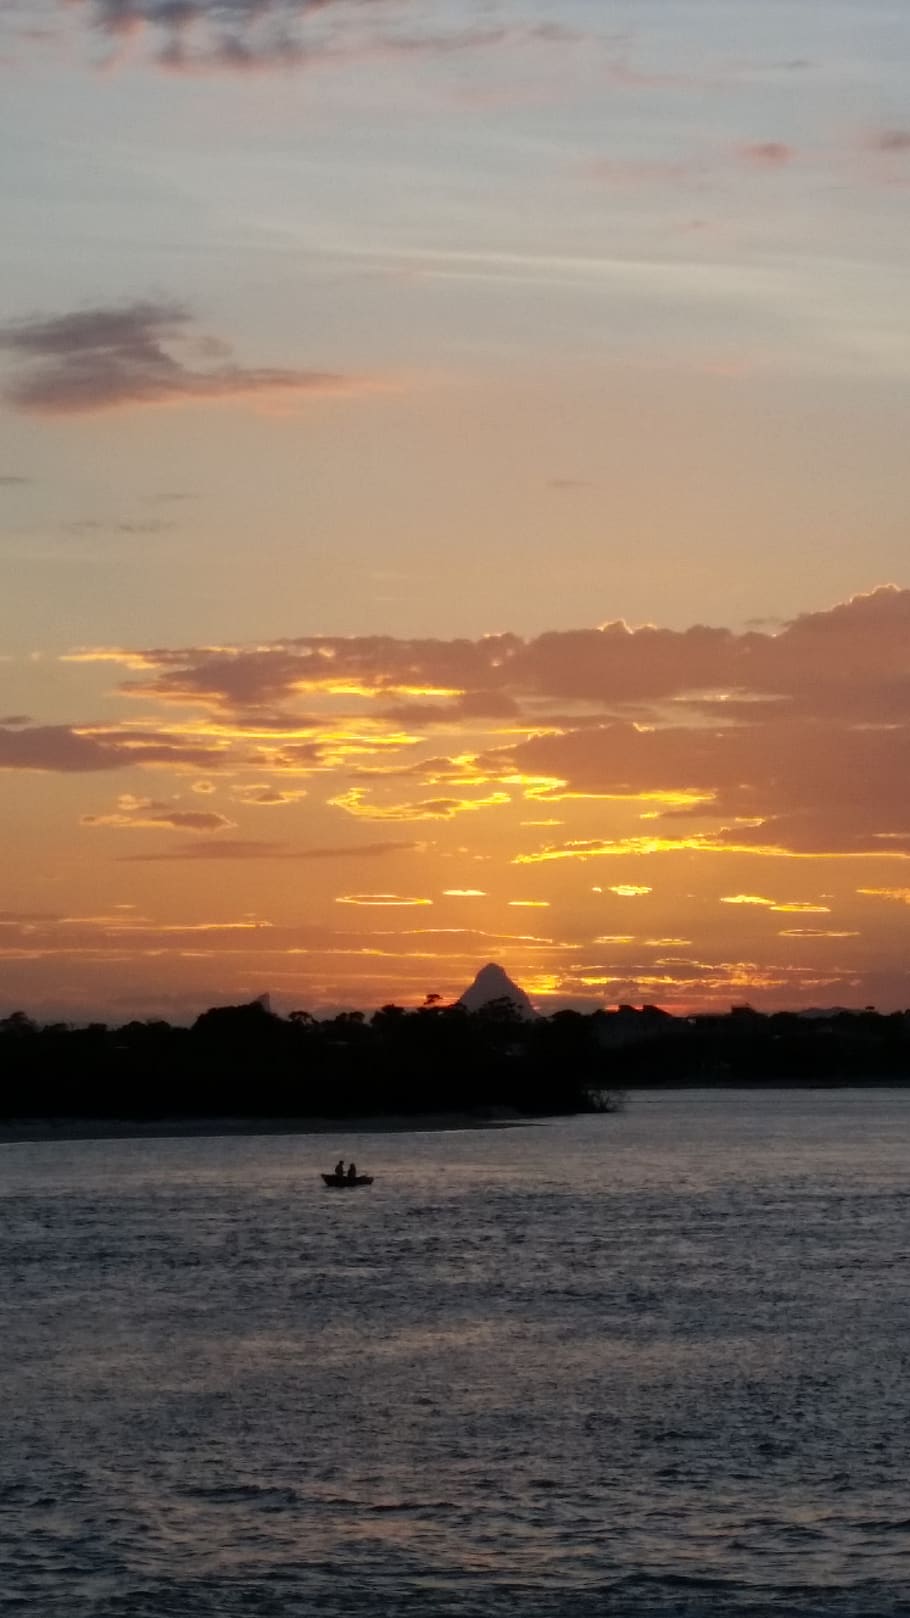 sunset with boat, sunset over water, glasshouse mountains sunset, australia, sunset, sky, scenics - nature, water, beauty in nature, orange color